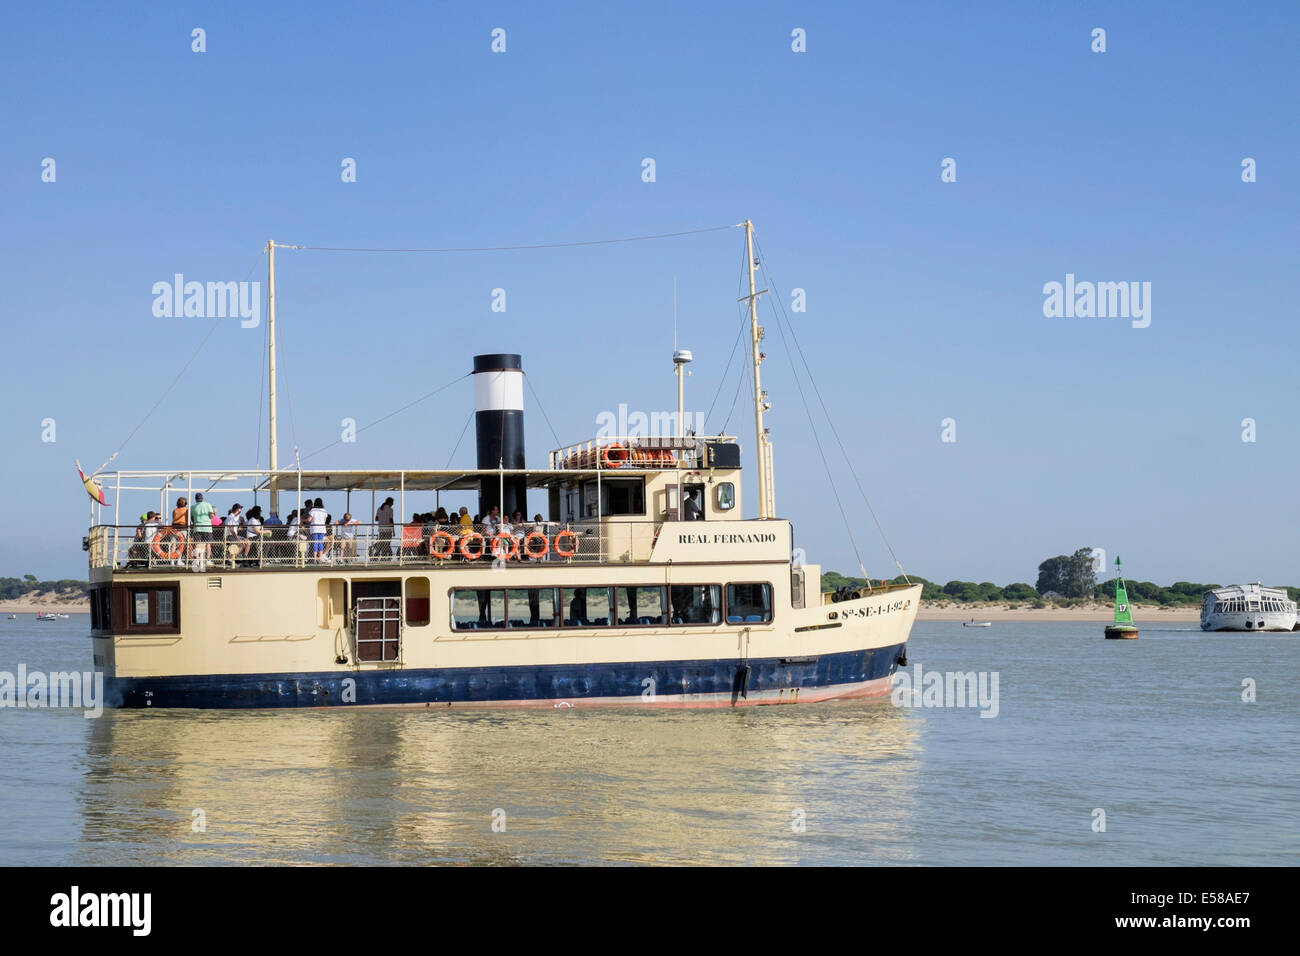 Ferryboat sets off from Sanlucar de Barremeda to cross the Guadalquivir river the Coto Donana nature reserve Stock Photo